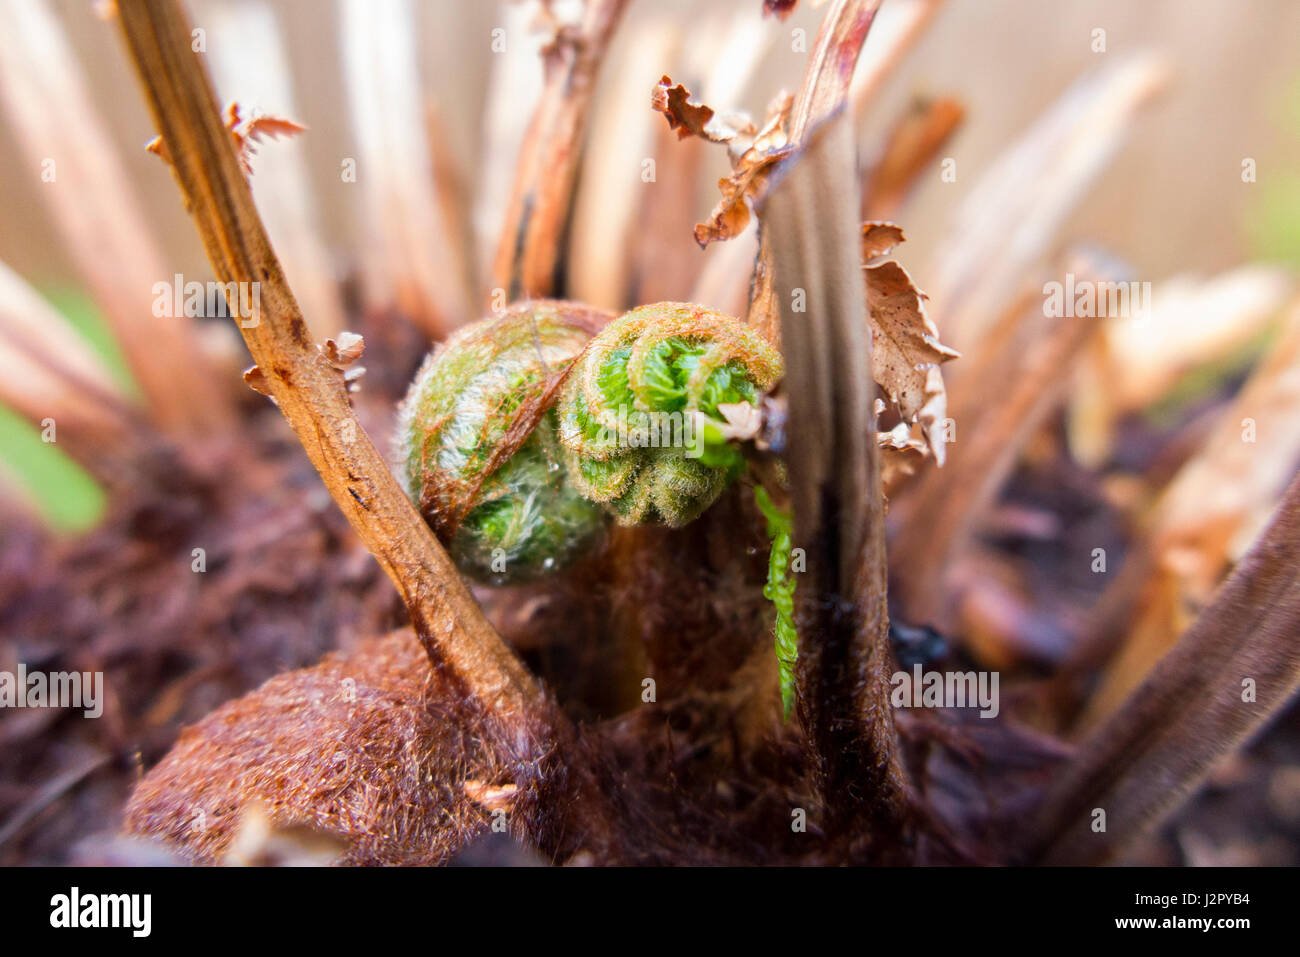 New growth shoots / frond / fronds in spring on a Tasmanian Treefern / tree fern – Dicksonia antarctica – that was collected from Tasmania. Australia. Stock Photo